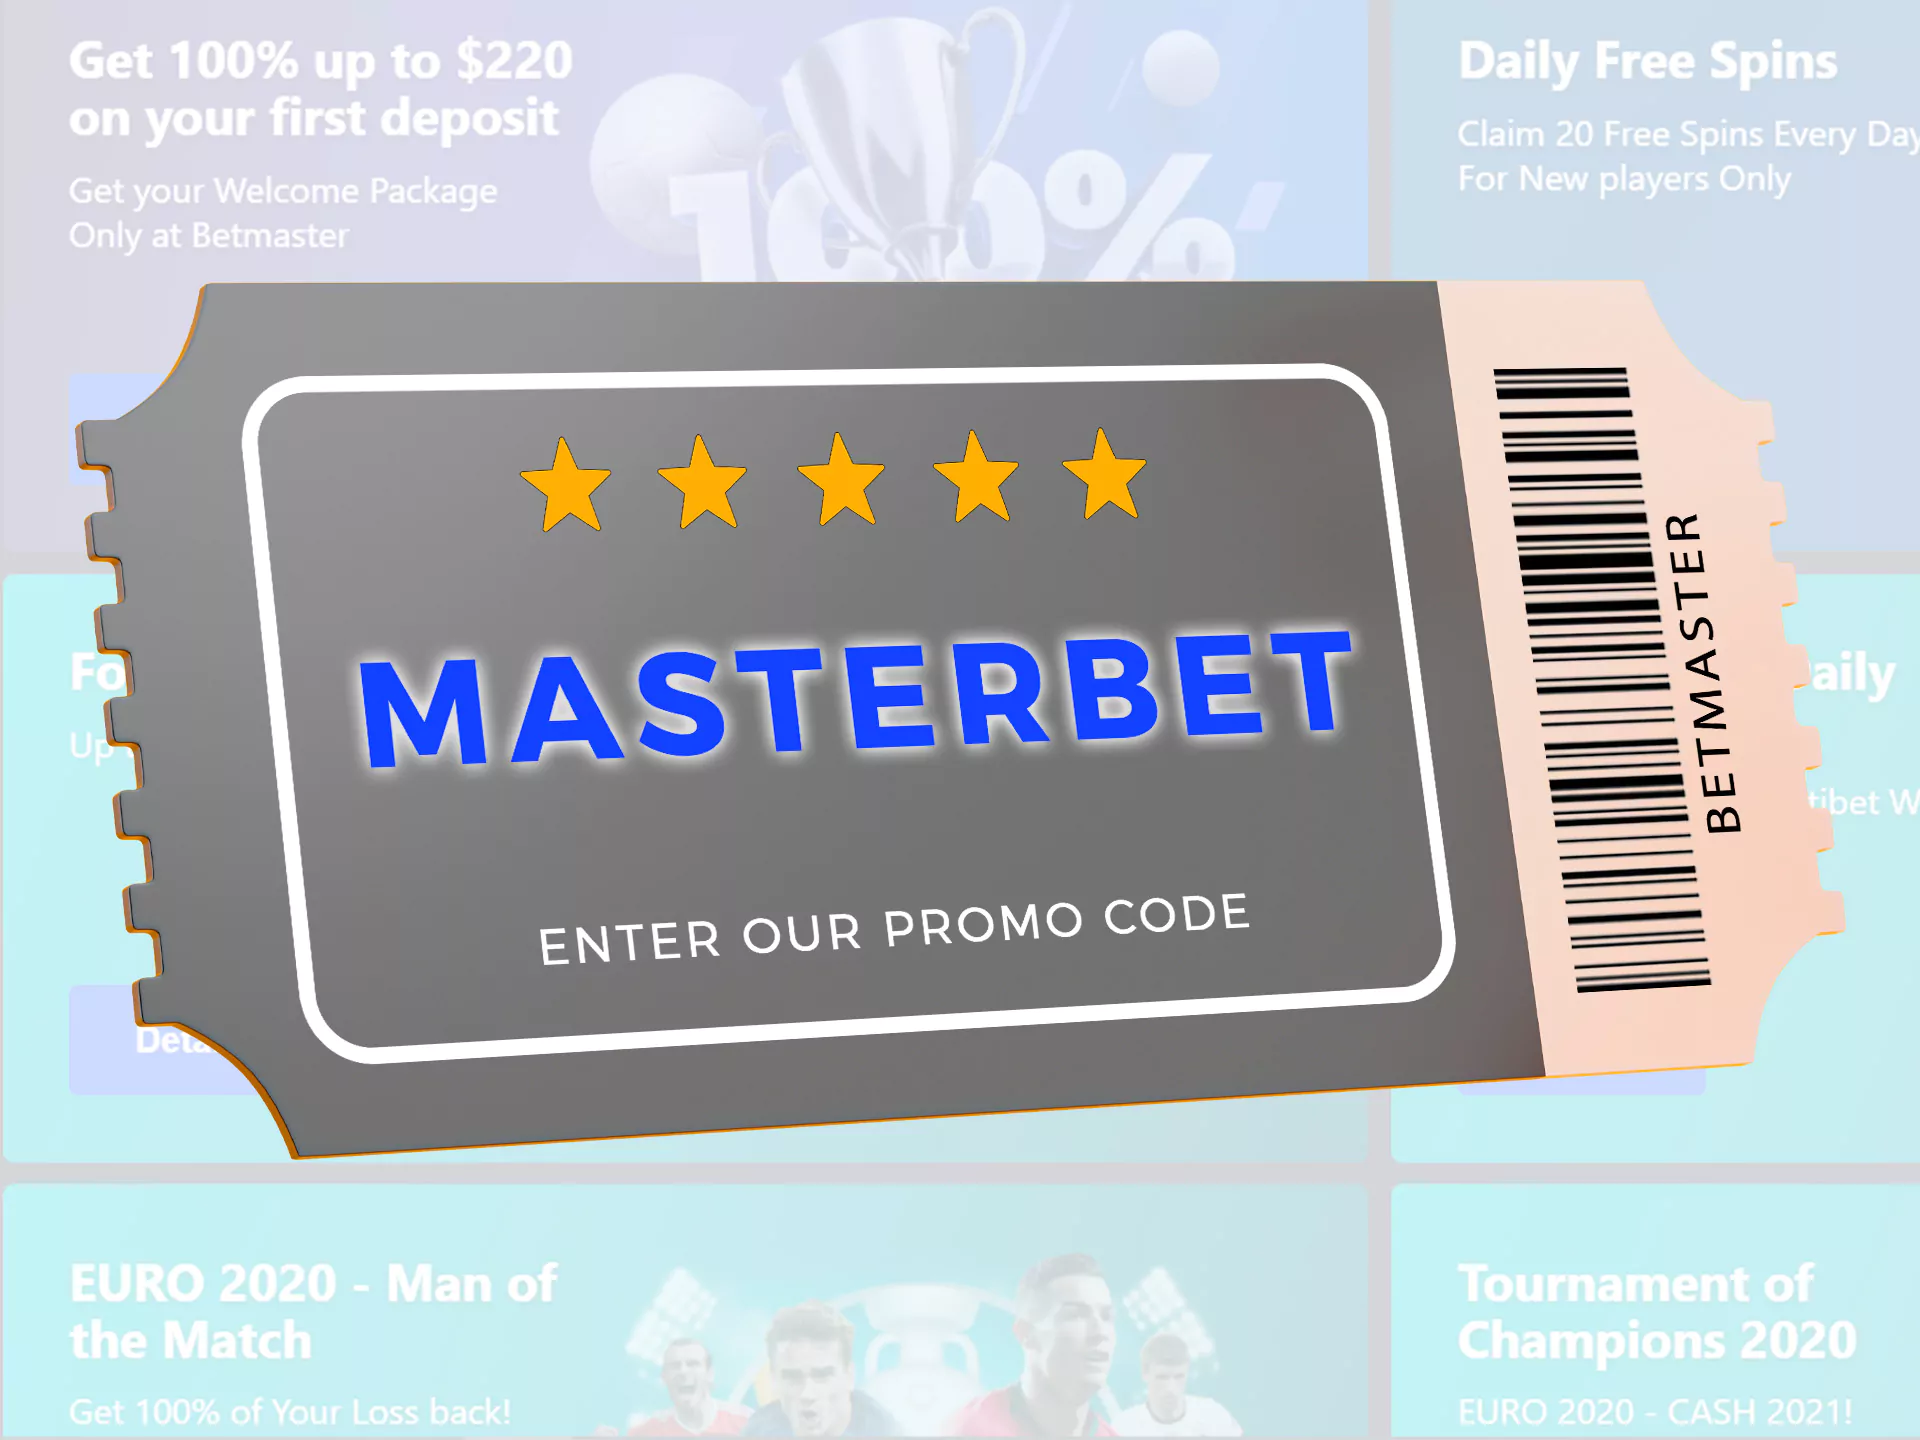 Use our MASTERBET promocode and bet profitably.